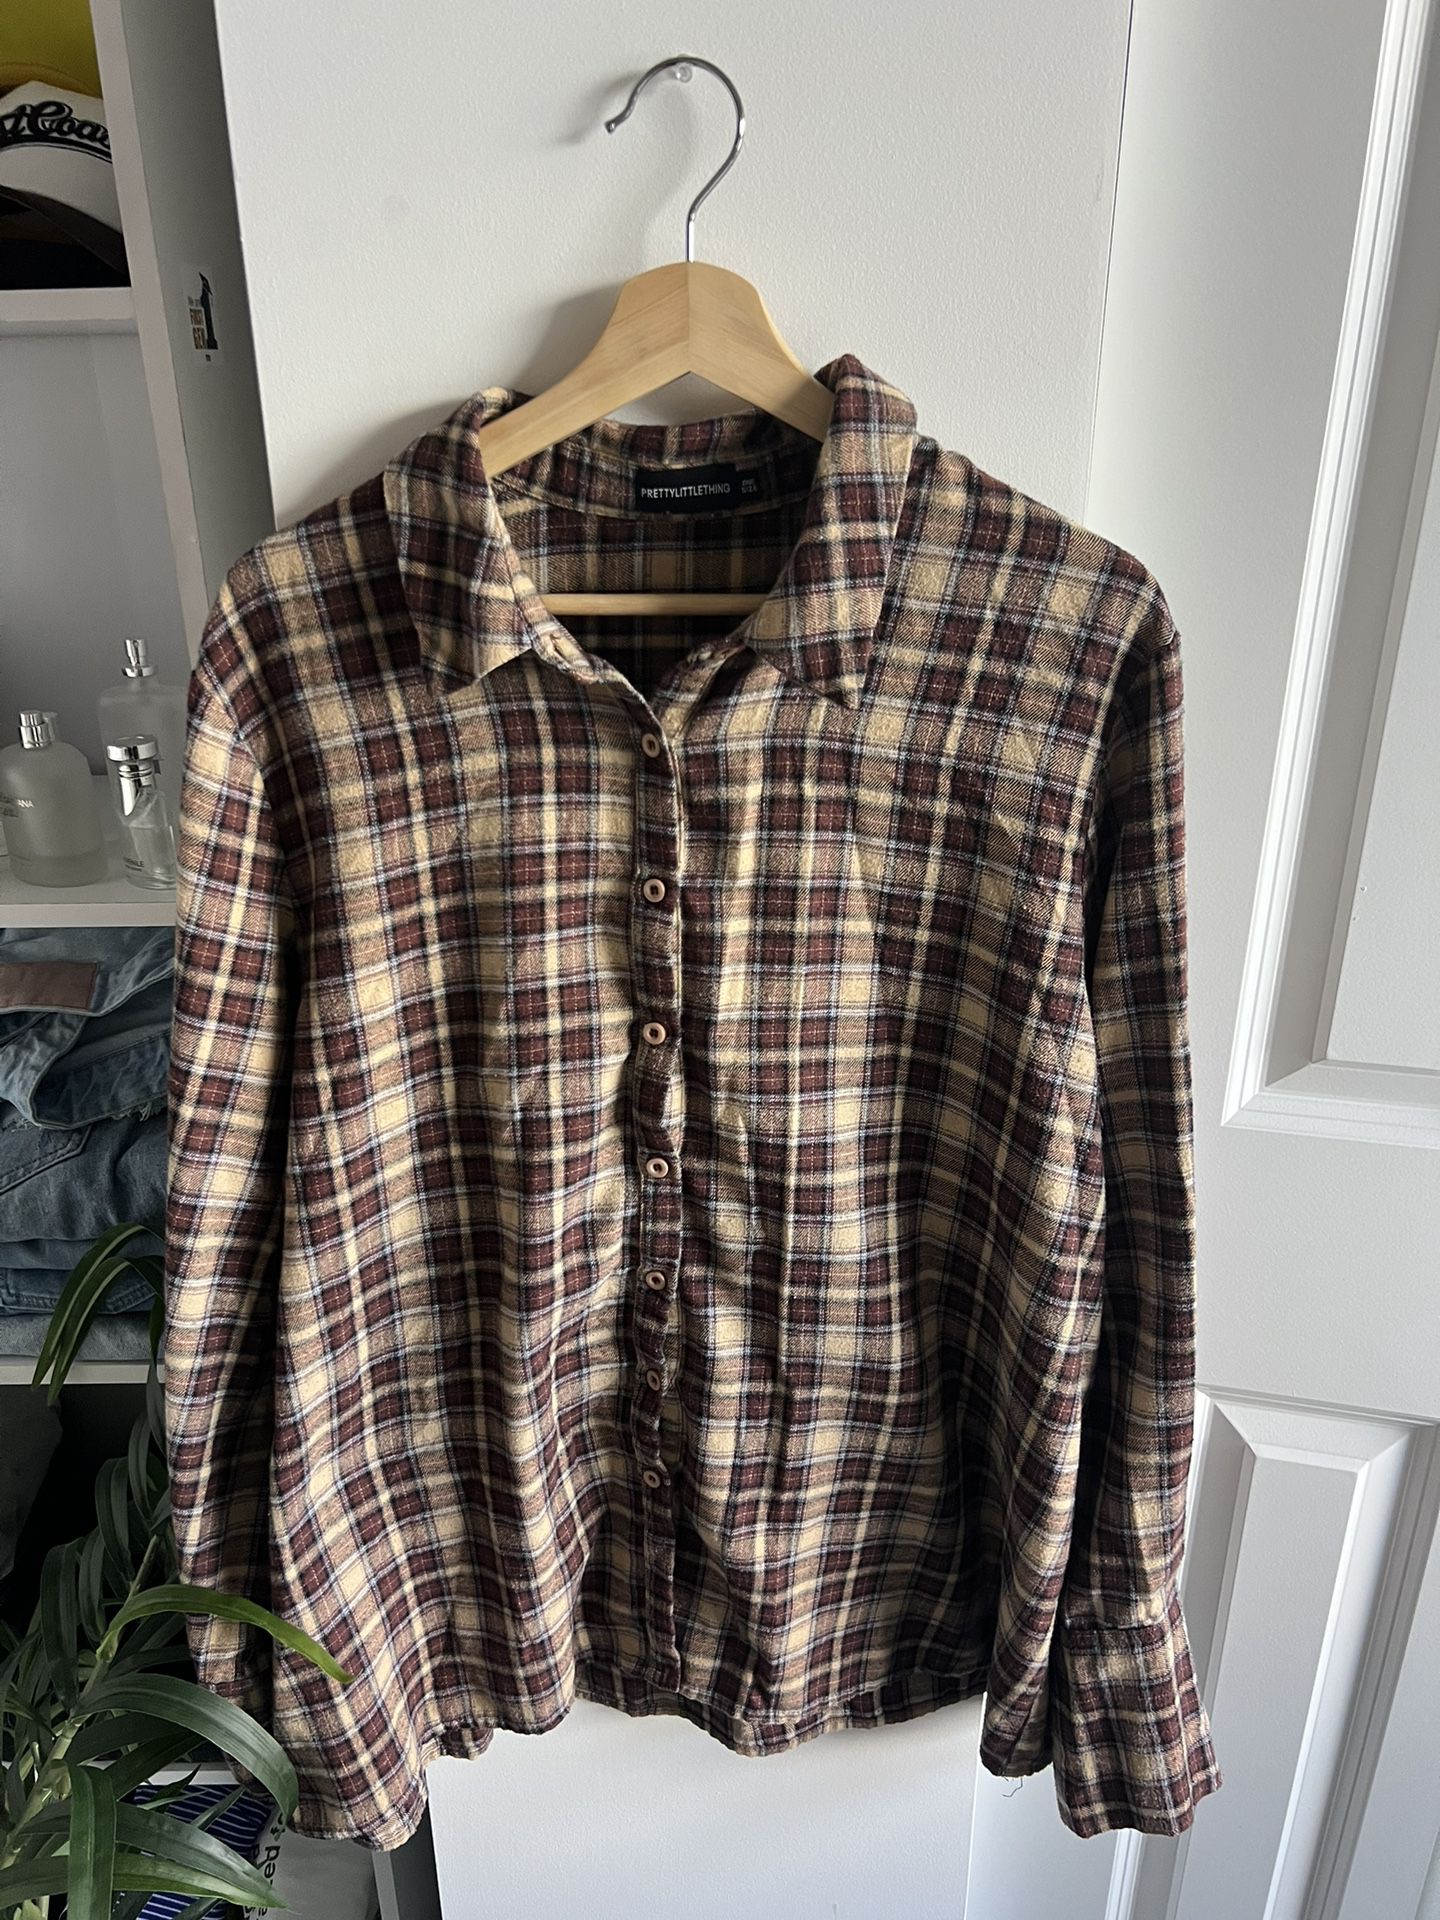 ! 6 for $30 ! Mens Flannels & Dress Shirts